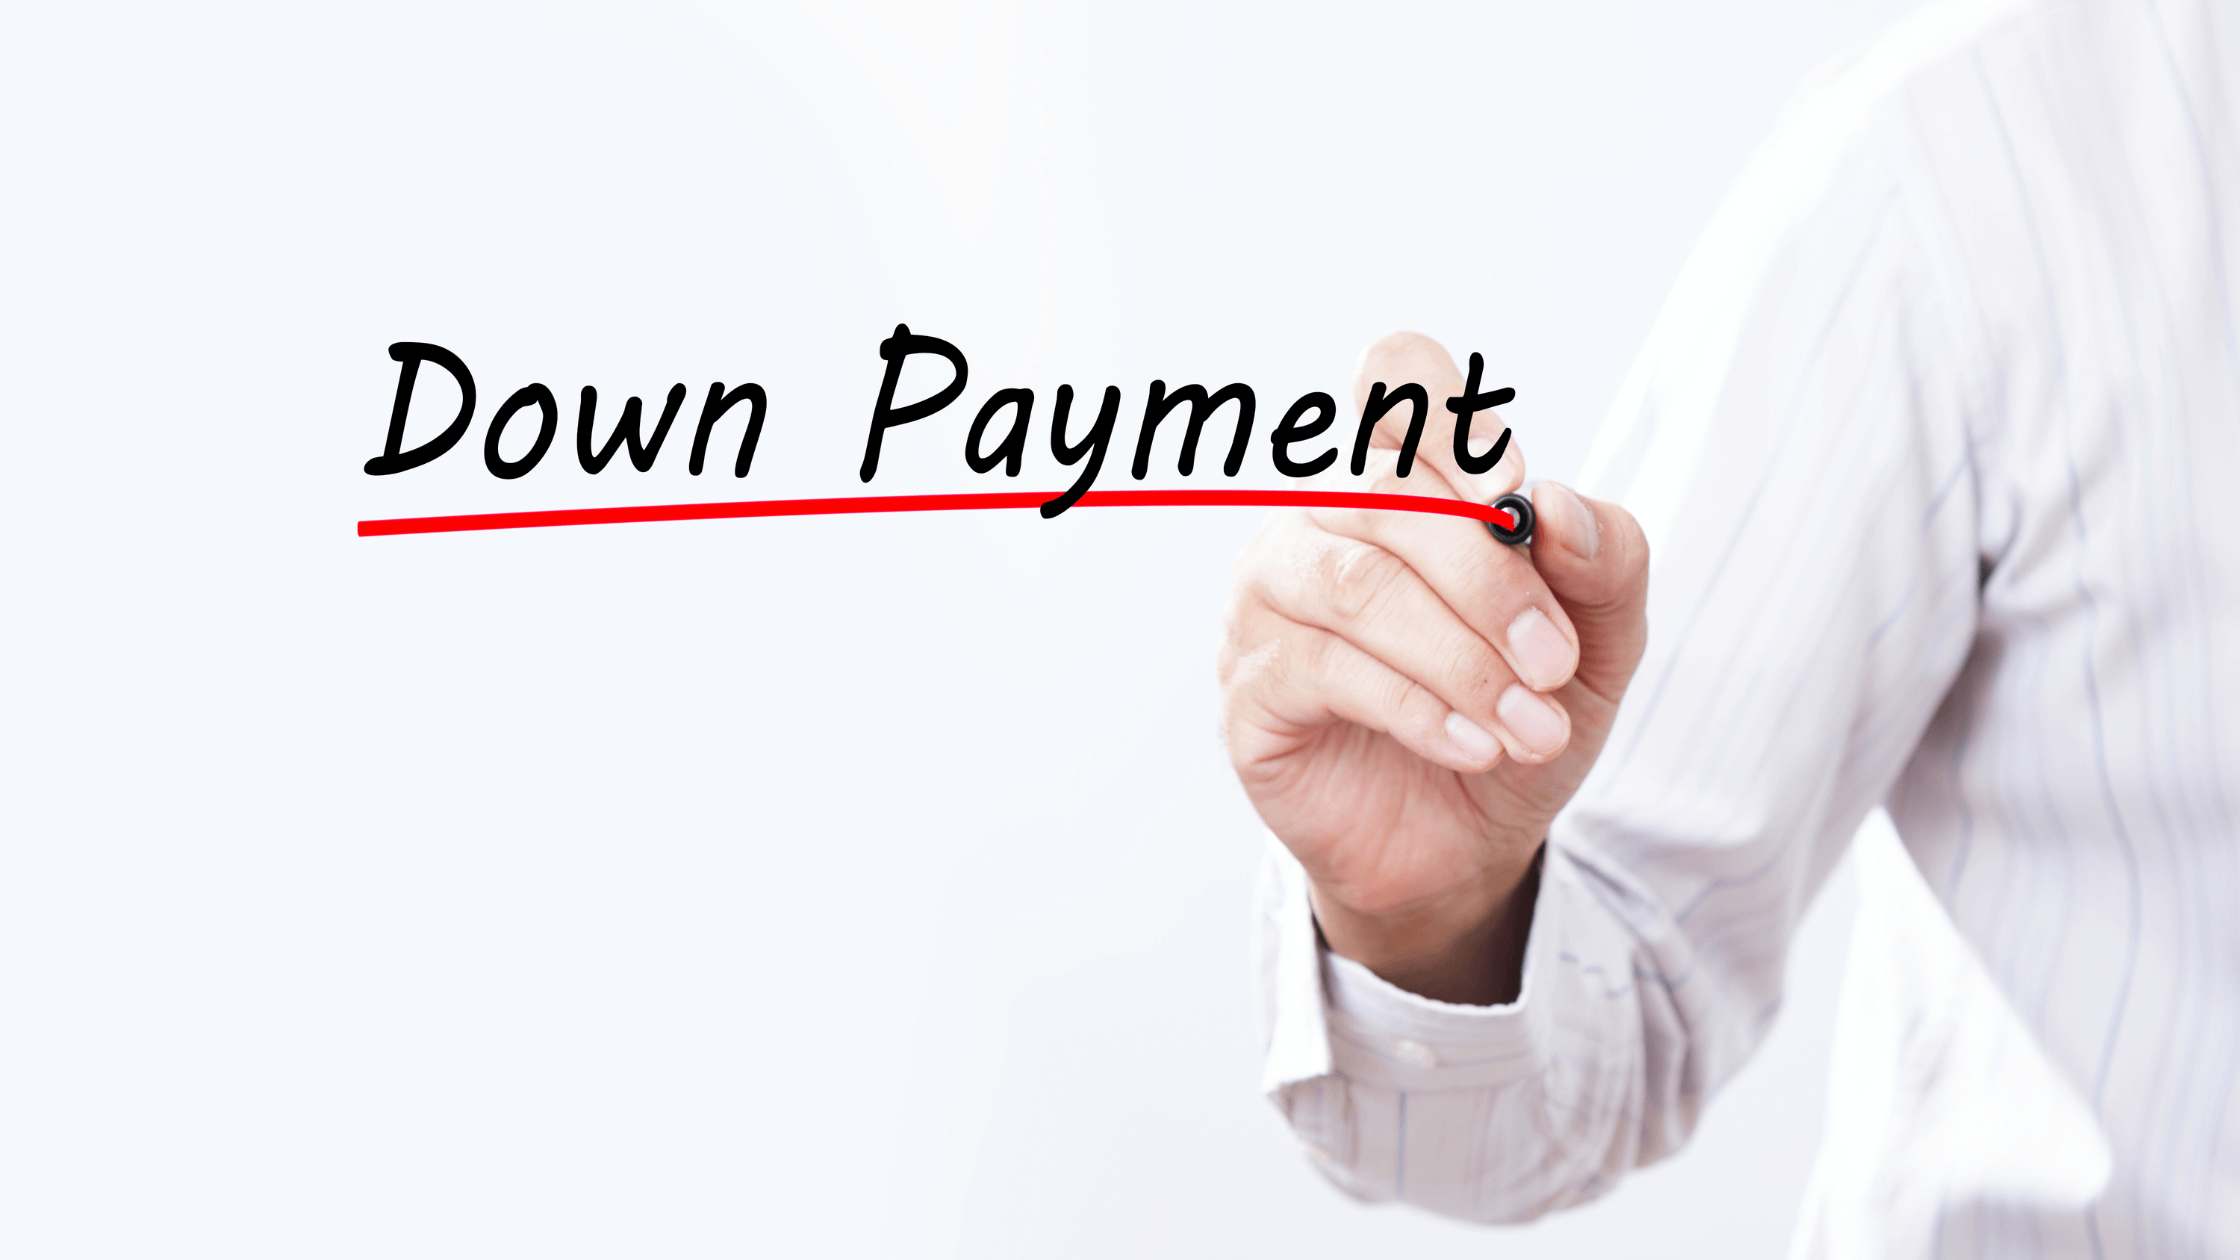 down payment written by marker